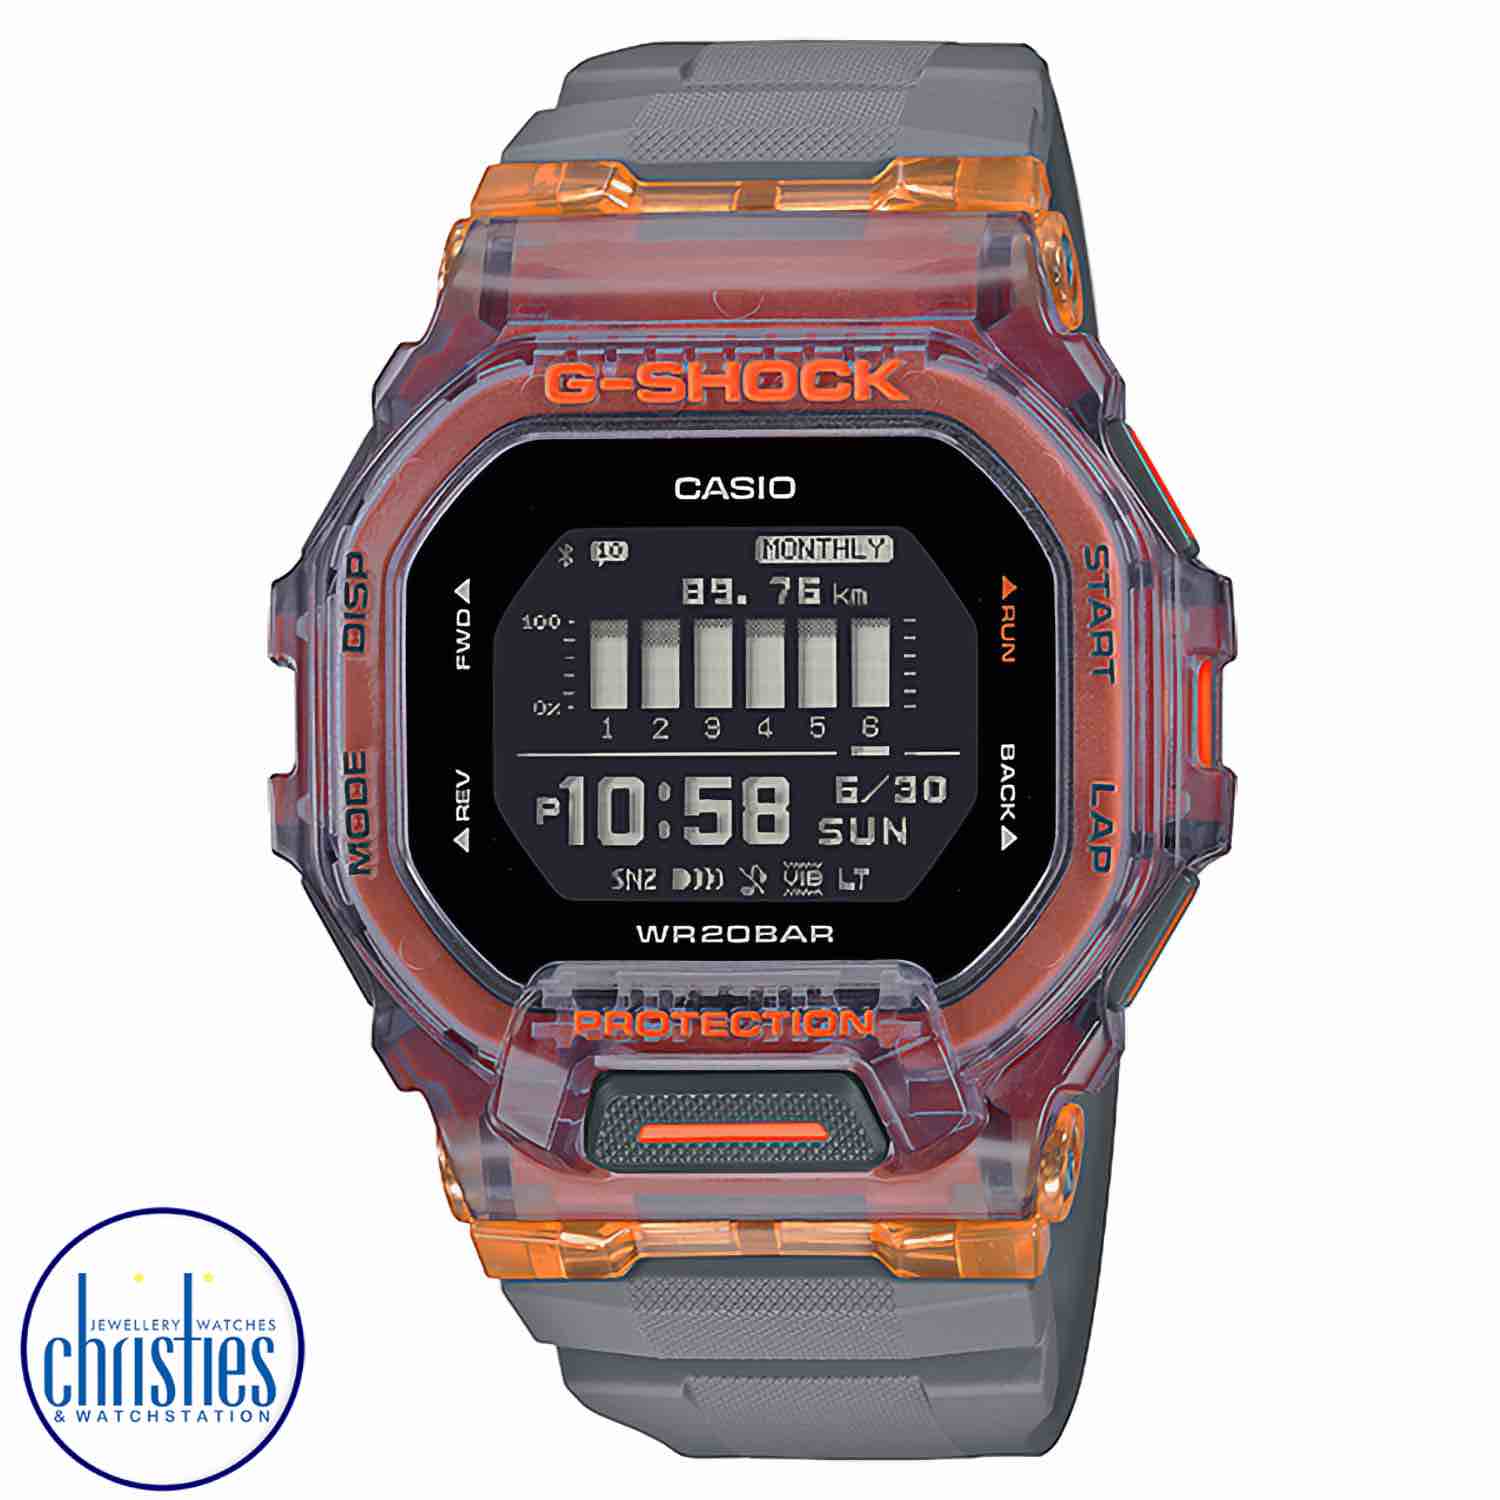 GBD200SM-1A5 Casio G-Shock G-SQUAD Watch g-shock watches pascoes